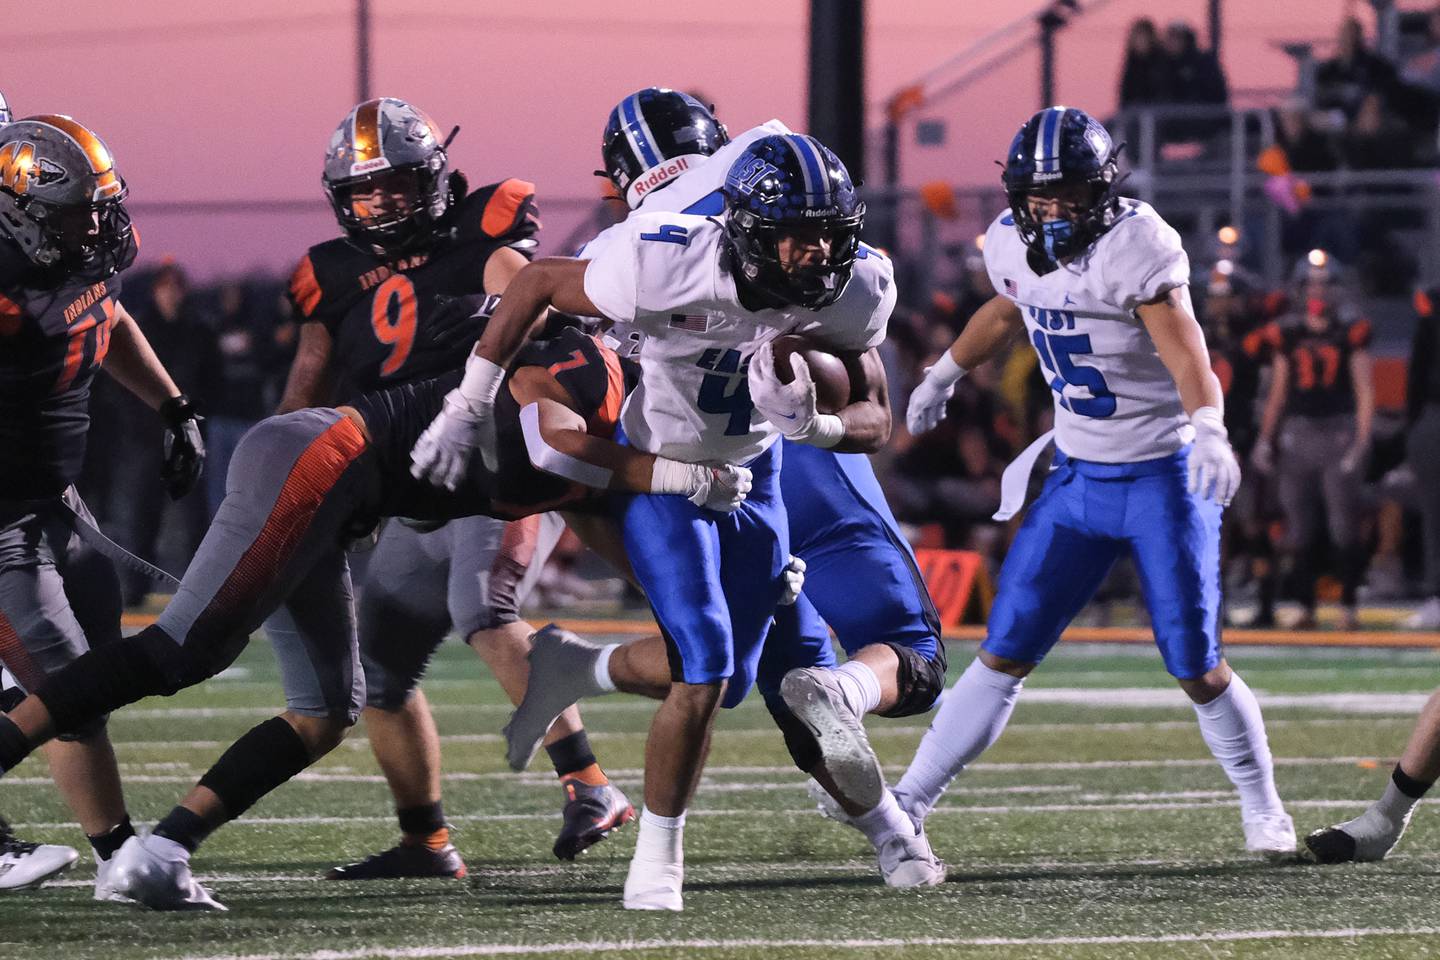 Lincoln-Way East's Trey Johnson breaks through the line against Minooka in the Class 8A 2nd round playoffs in Minooka on Saturday, Nov. 6, 2021.